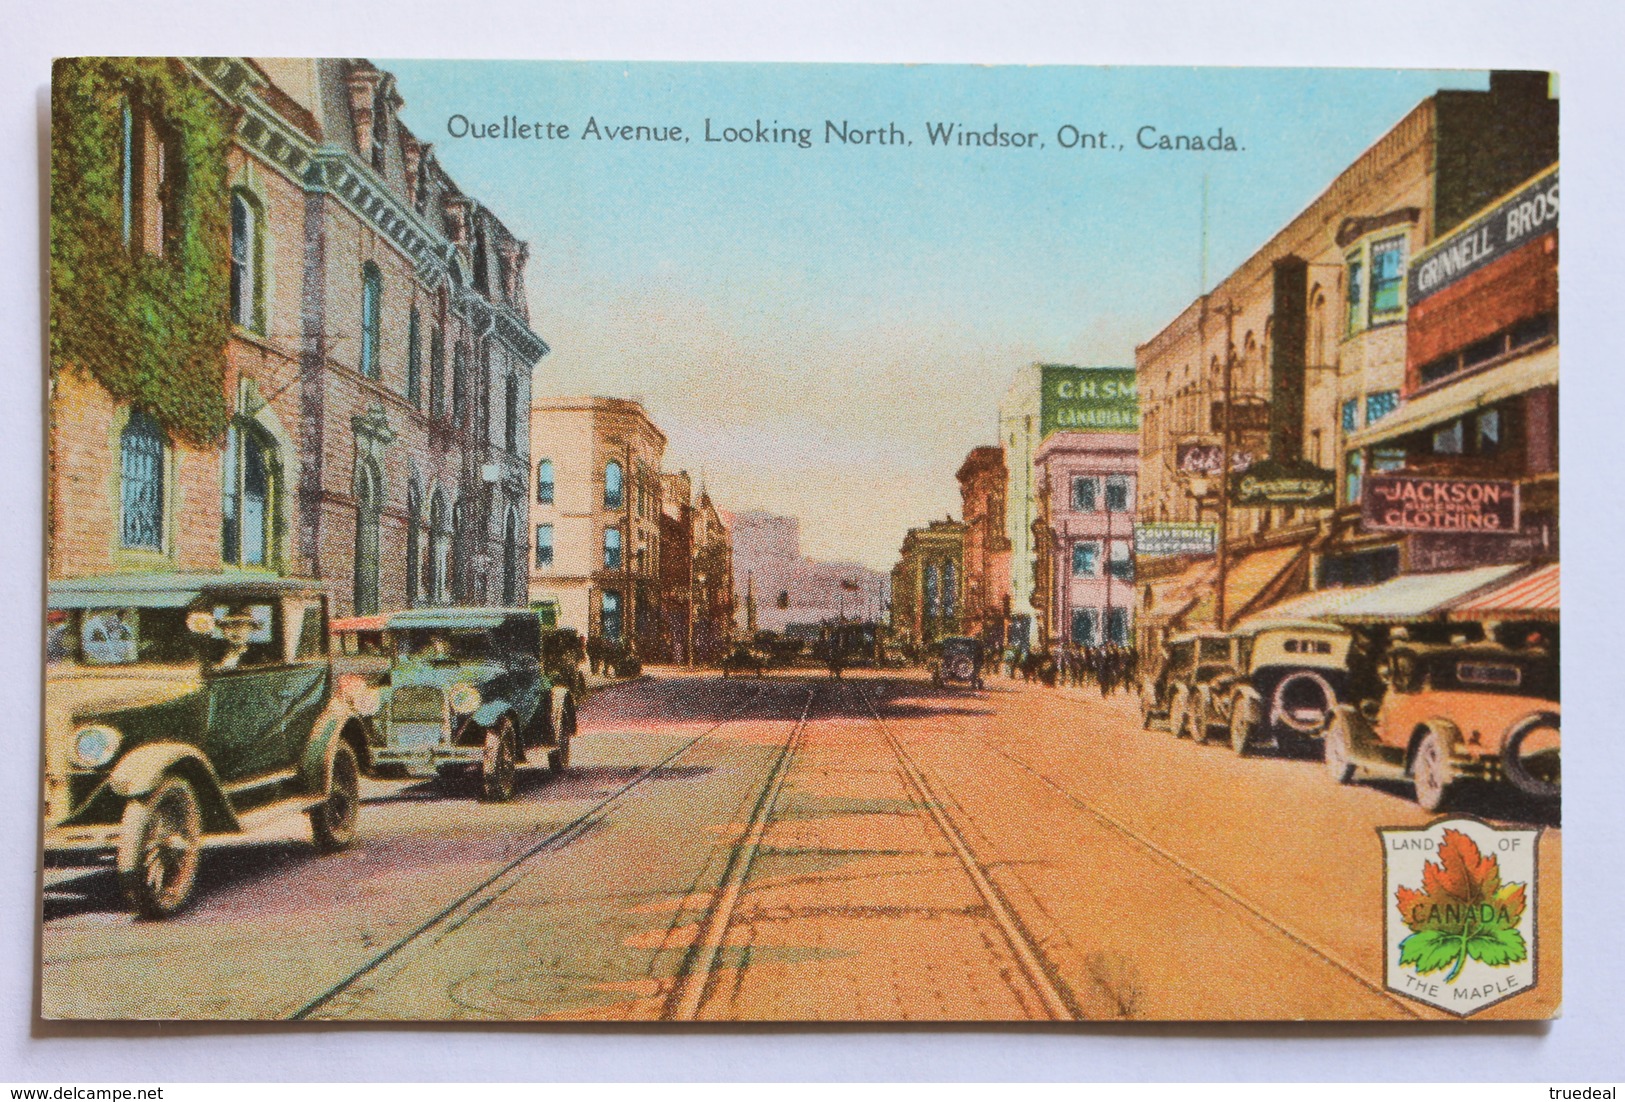 Ouellette Avenue, Looking North, Windsor, Ontario, Canada - Windsor